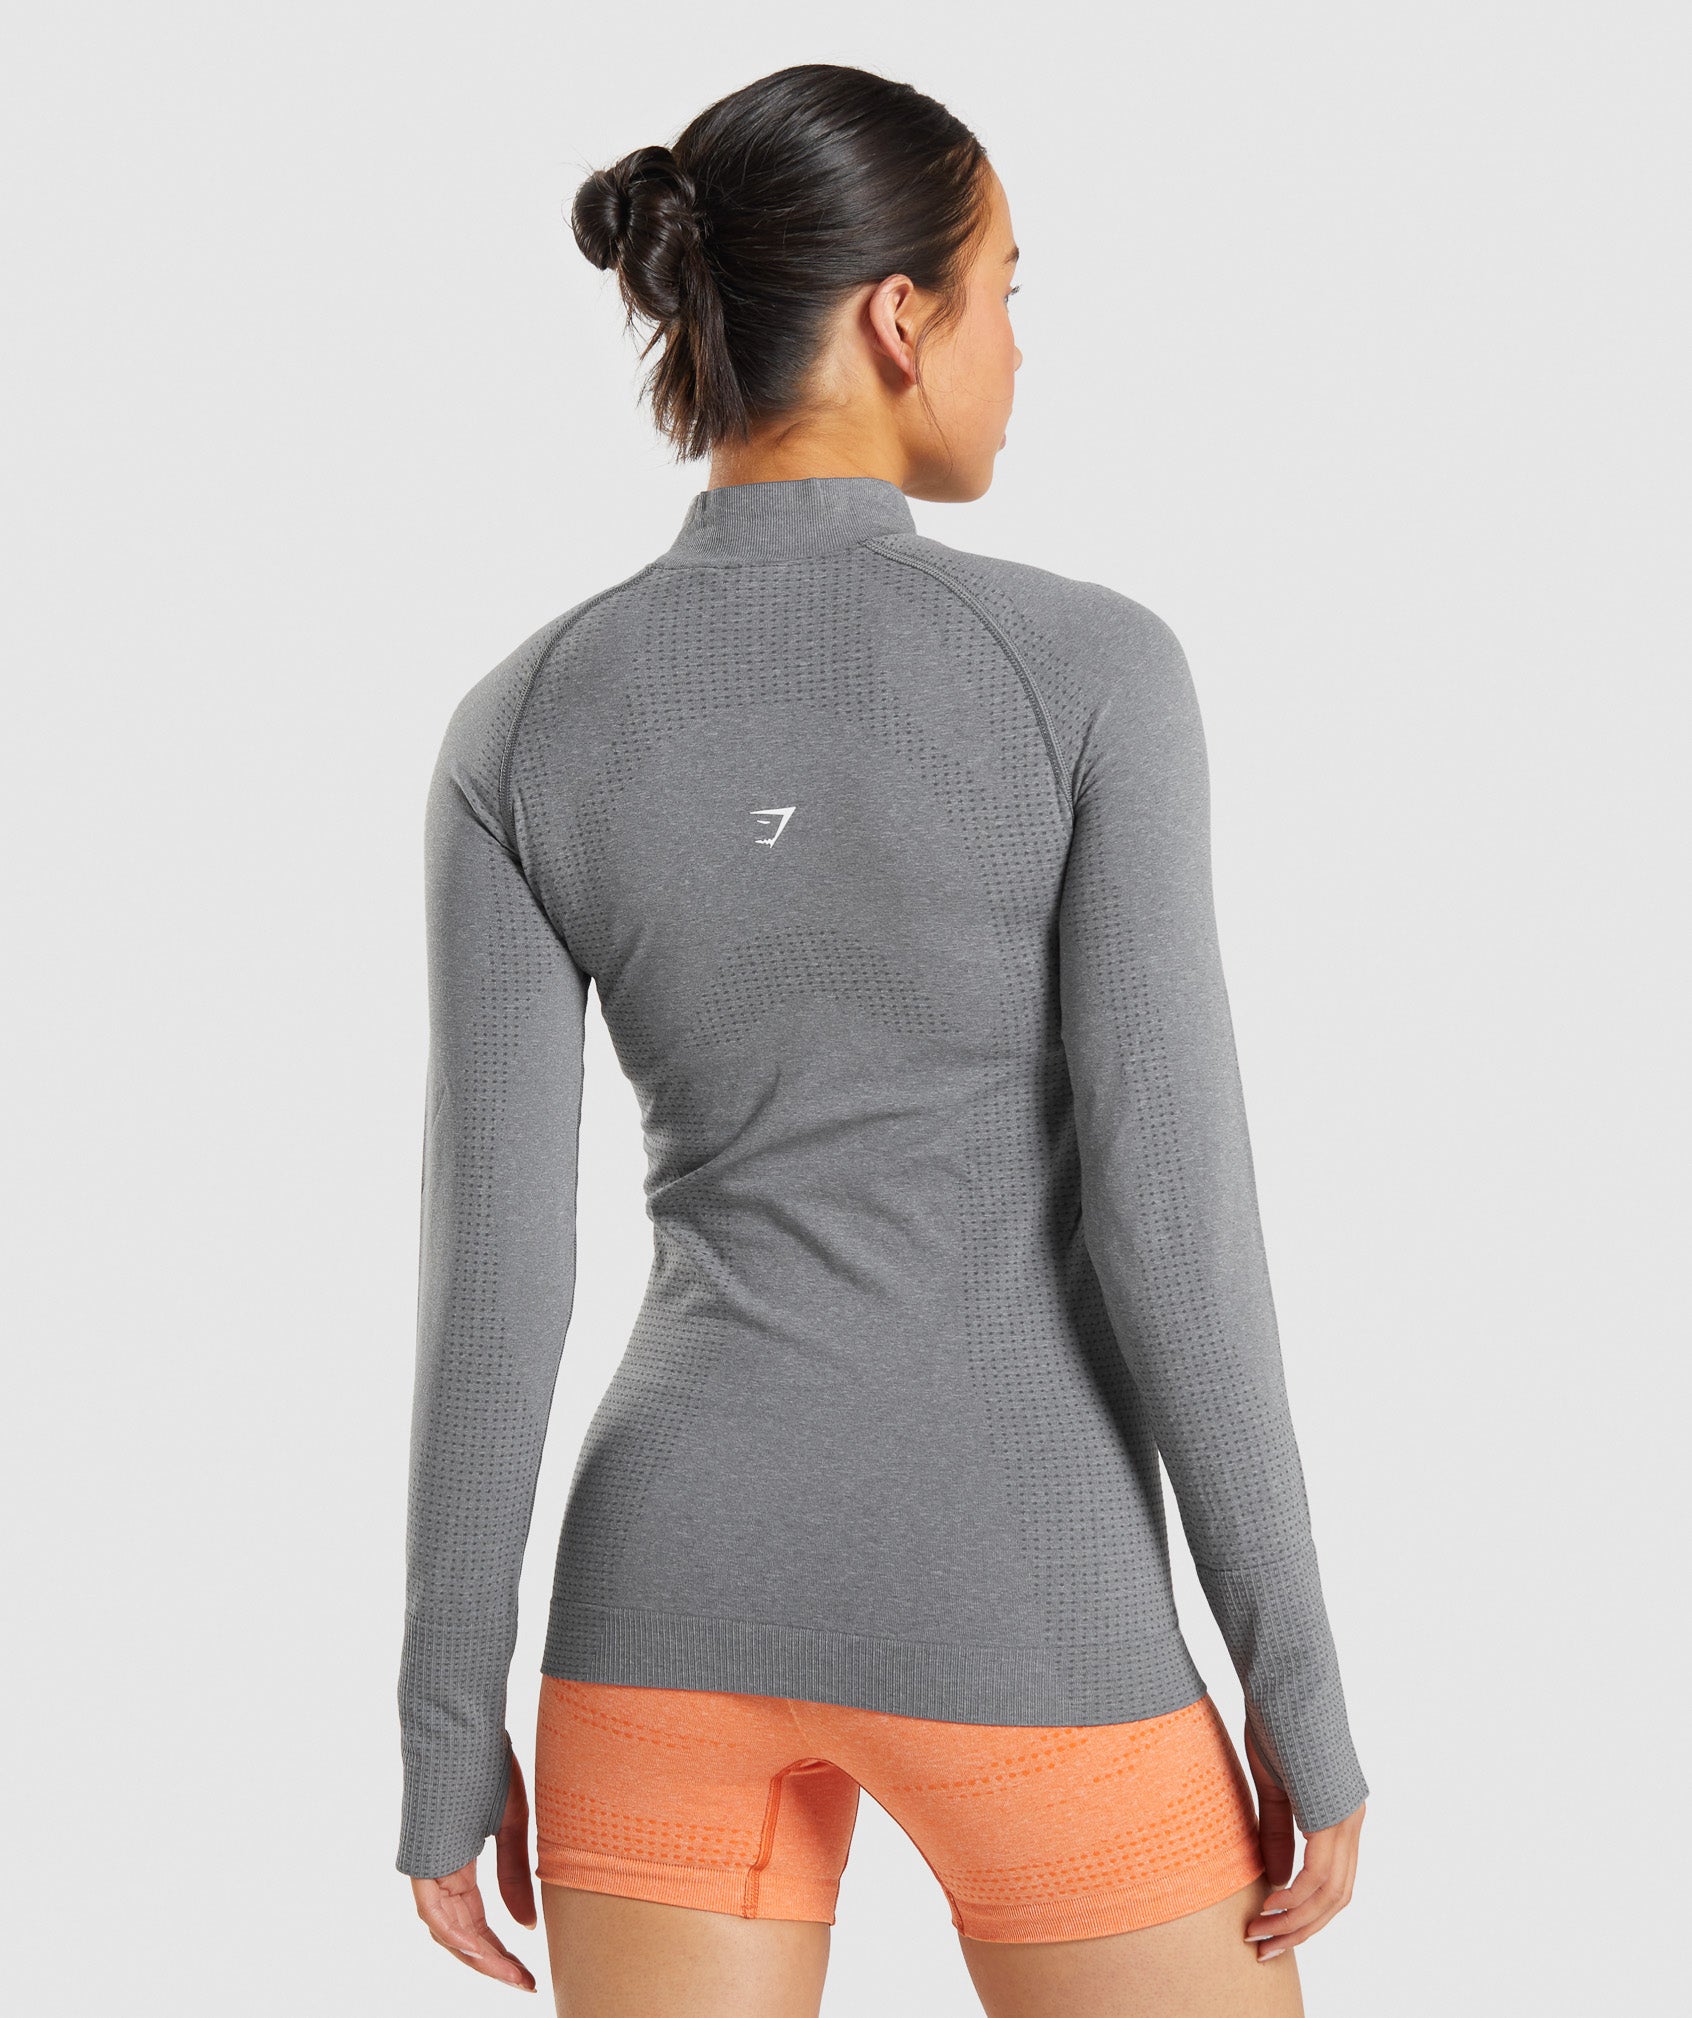 Gymshark Vital Seamless 2.0 1/2 Zip Pullover - Light Grey Marl – Client 446  100K products